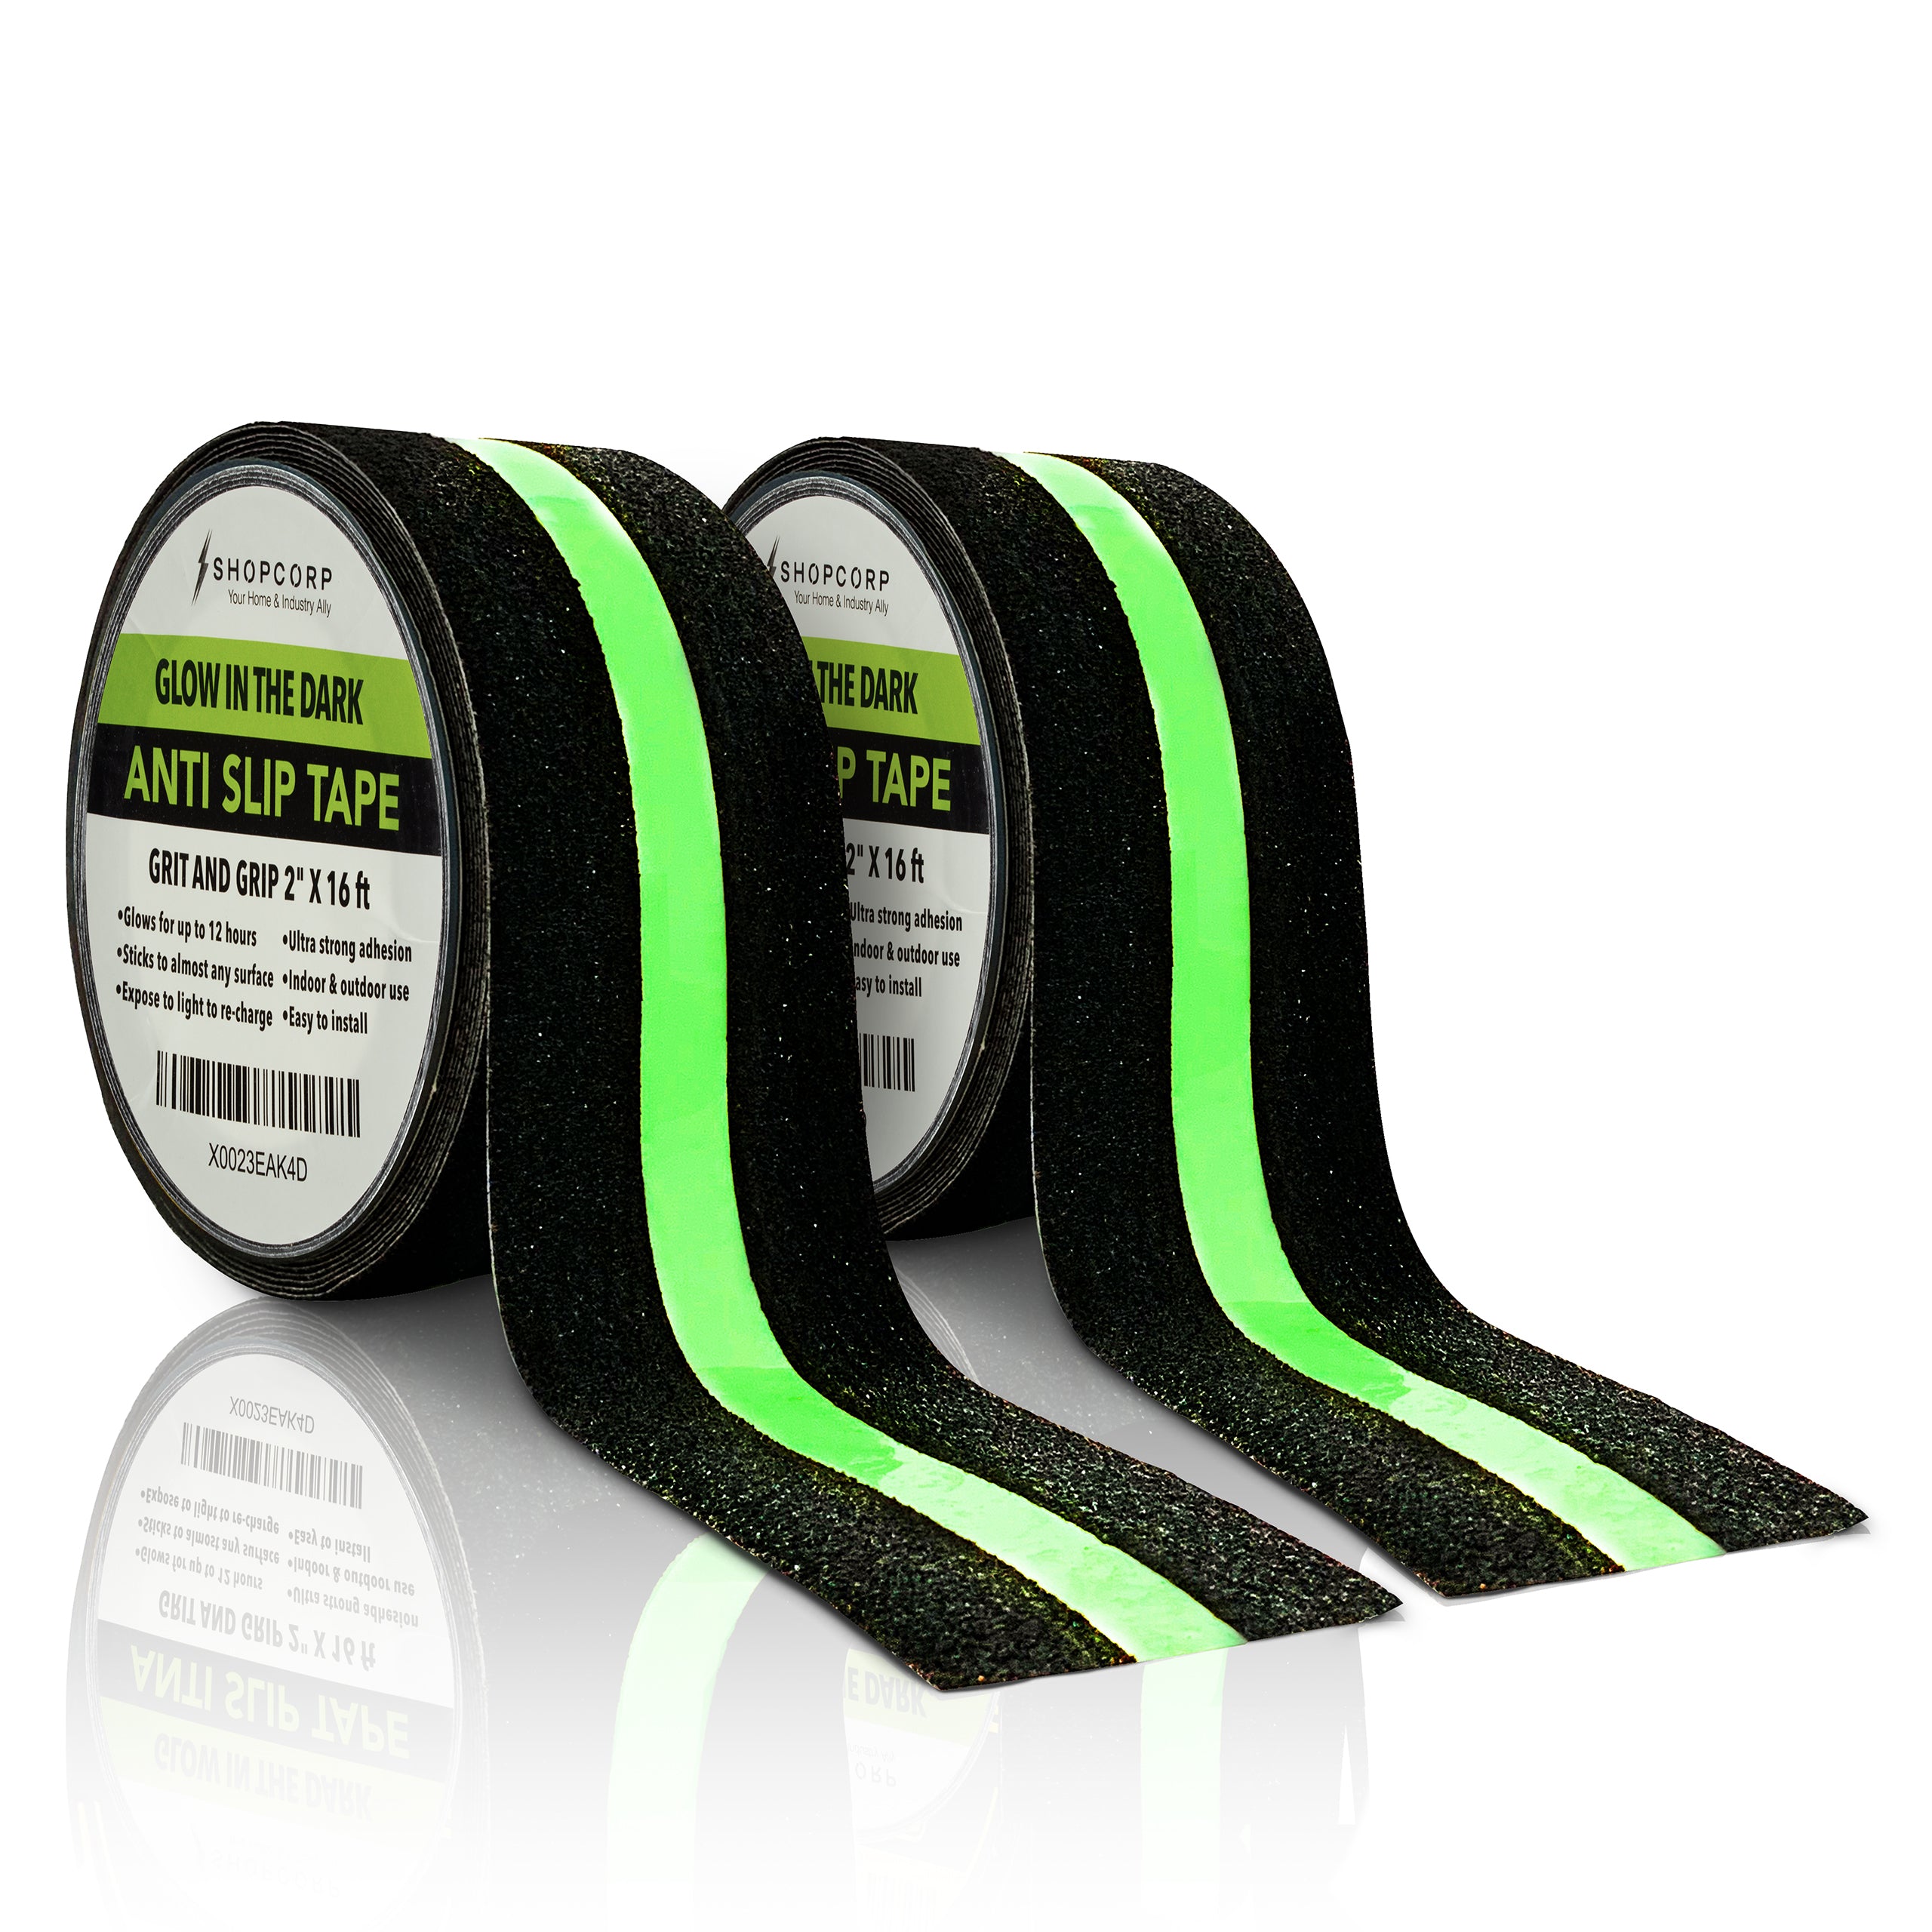 Electrodepot Professional Non-Slip Glow in The Dark Tape Heavy Duty Adhesive Grip Strip for Indoors and Outdoors (2 Inches Wide x 16.4 Feet Long)